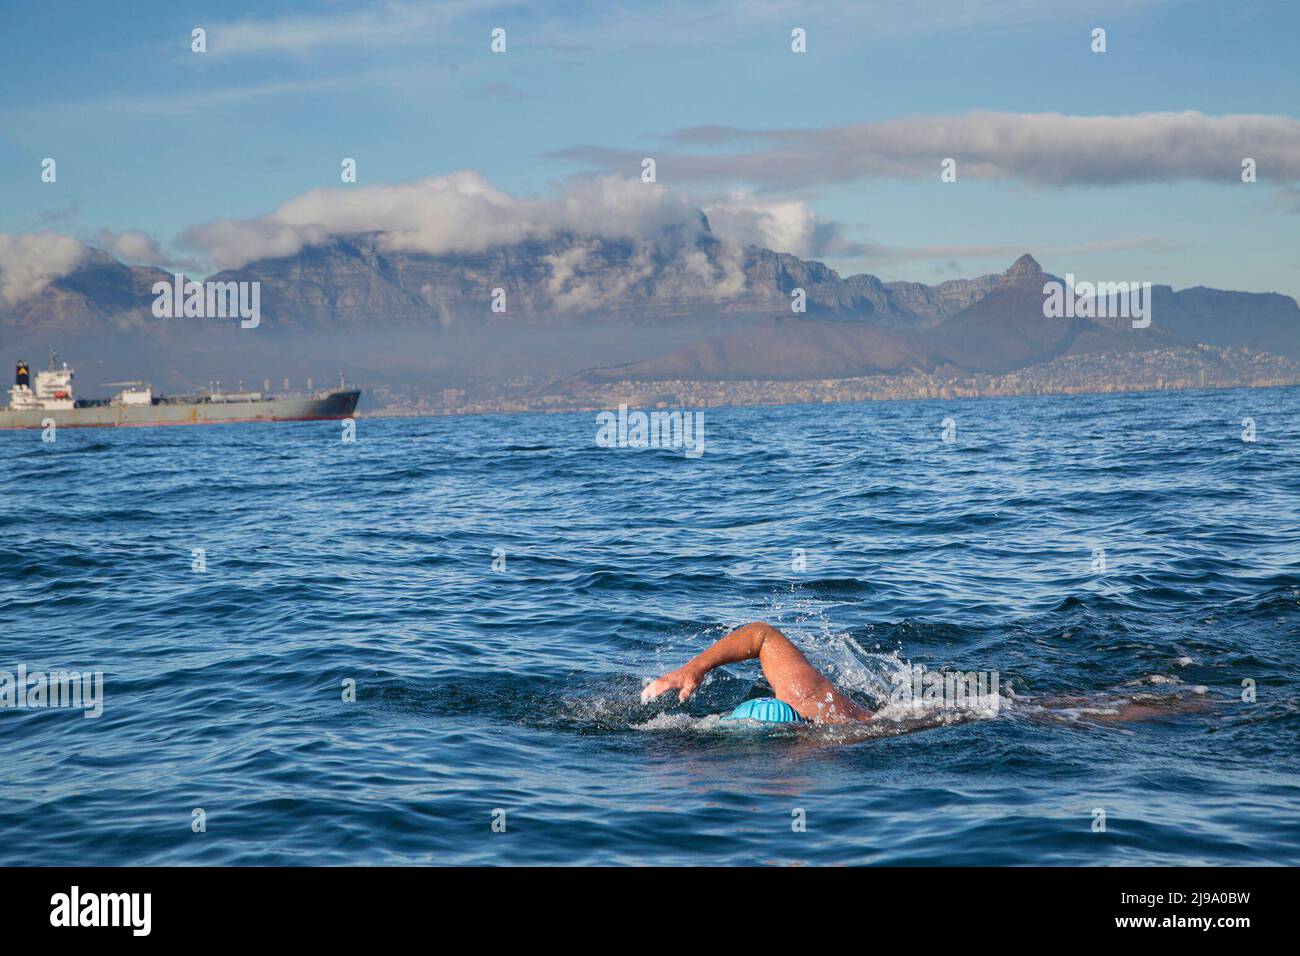 (220522) -- CAPE TOWN, May 22, 2022 (Xinhua) -- South African man Howard Warrington swims in the sea from Robben Island to the shore in Cape Town, South Africa, on May 21, 2022. South African man Howard Warrington on Saturday morning completed his 100th sea crossing from famous Robben Island to the shore in Cape Town, to raise funds for Cape of Good Hope SPCA (Society for the Prevention of Cruelty to Animals), an animal welfare organization. (photo by Francisco Scarbar/Xinhua) Stock Photo